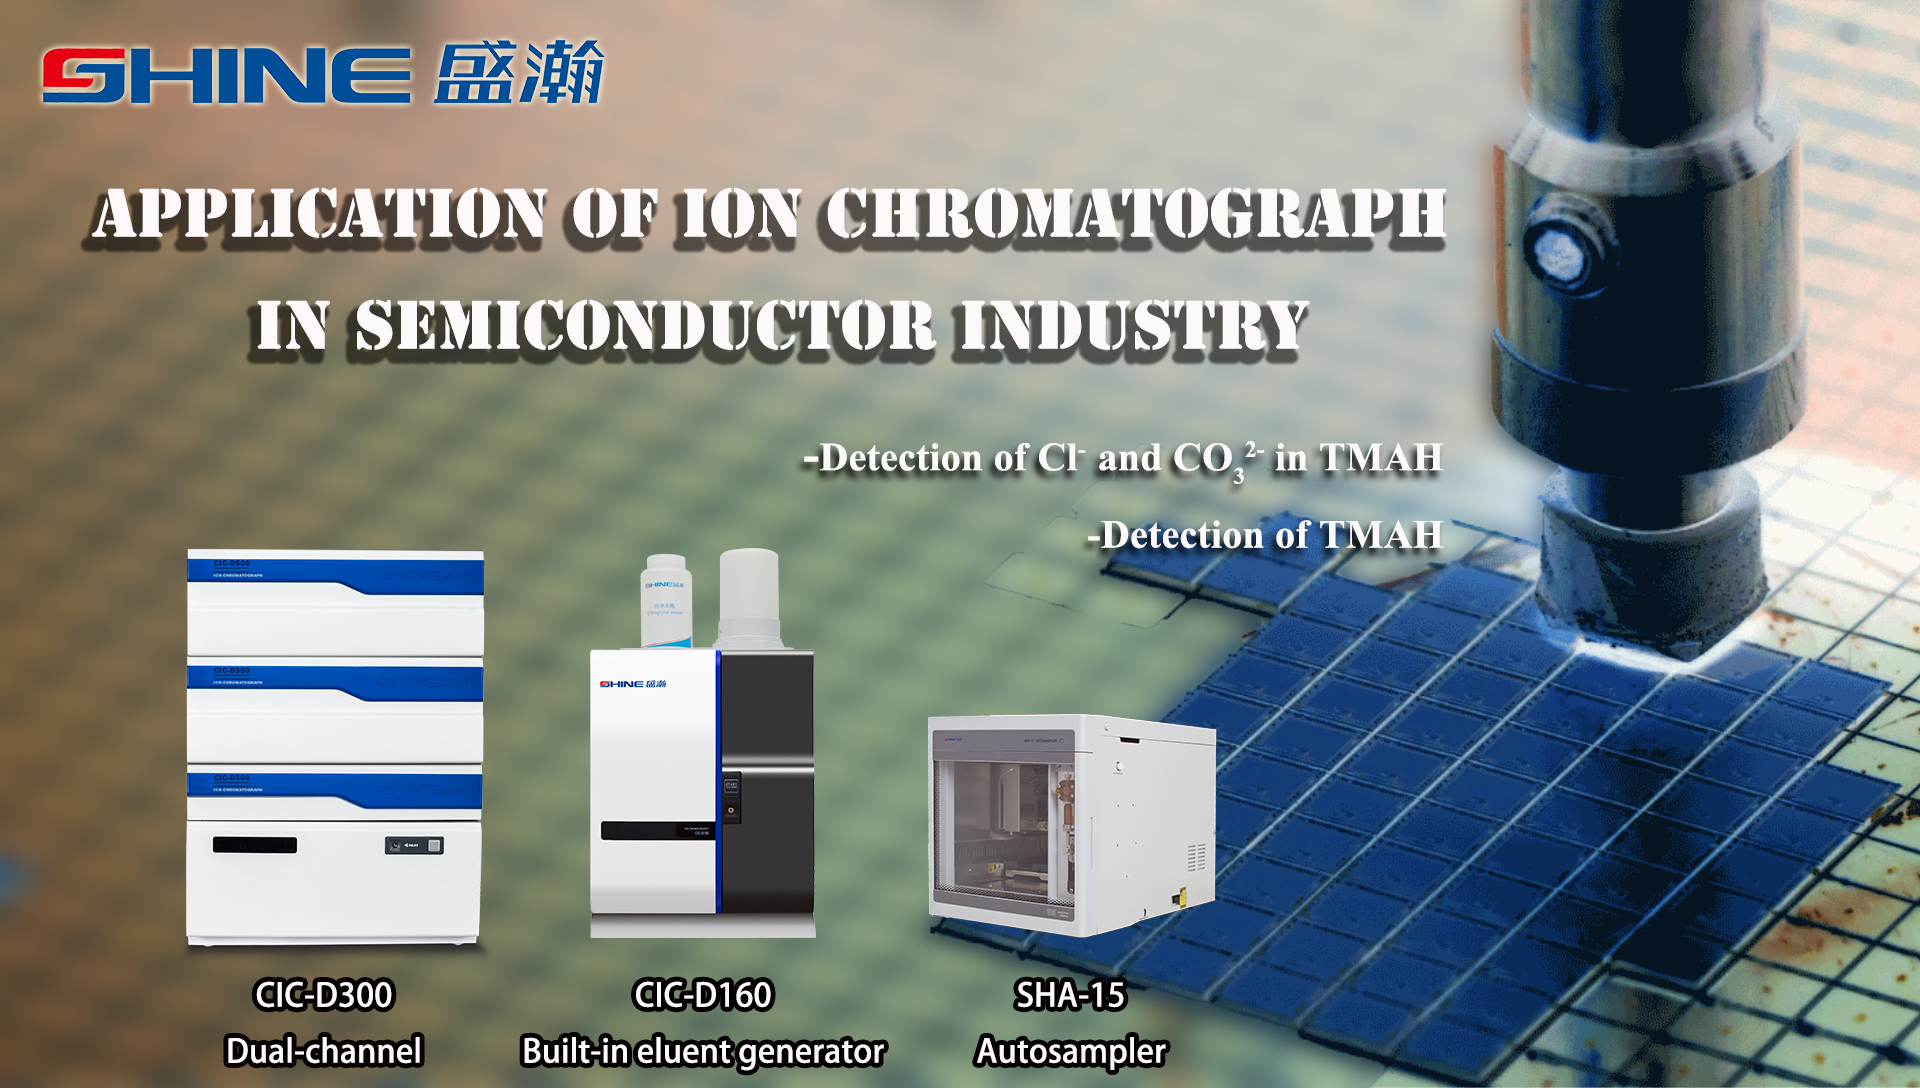 Application of Ion Chromatography in Semiconductor Industry